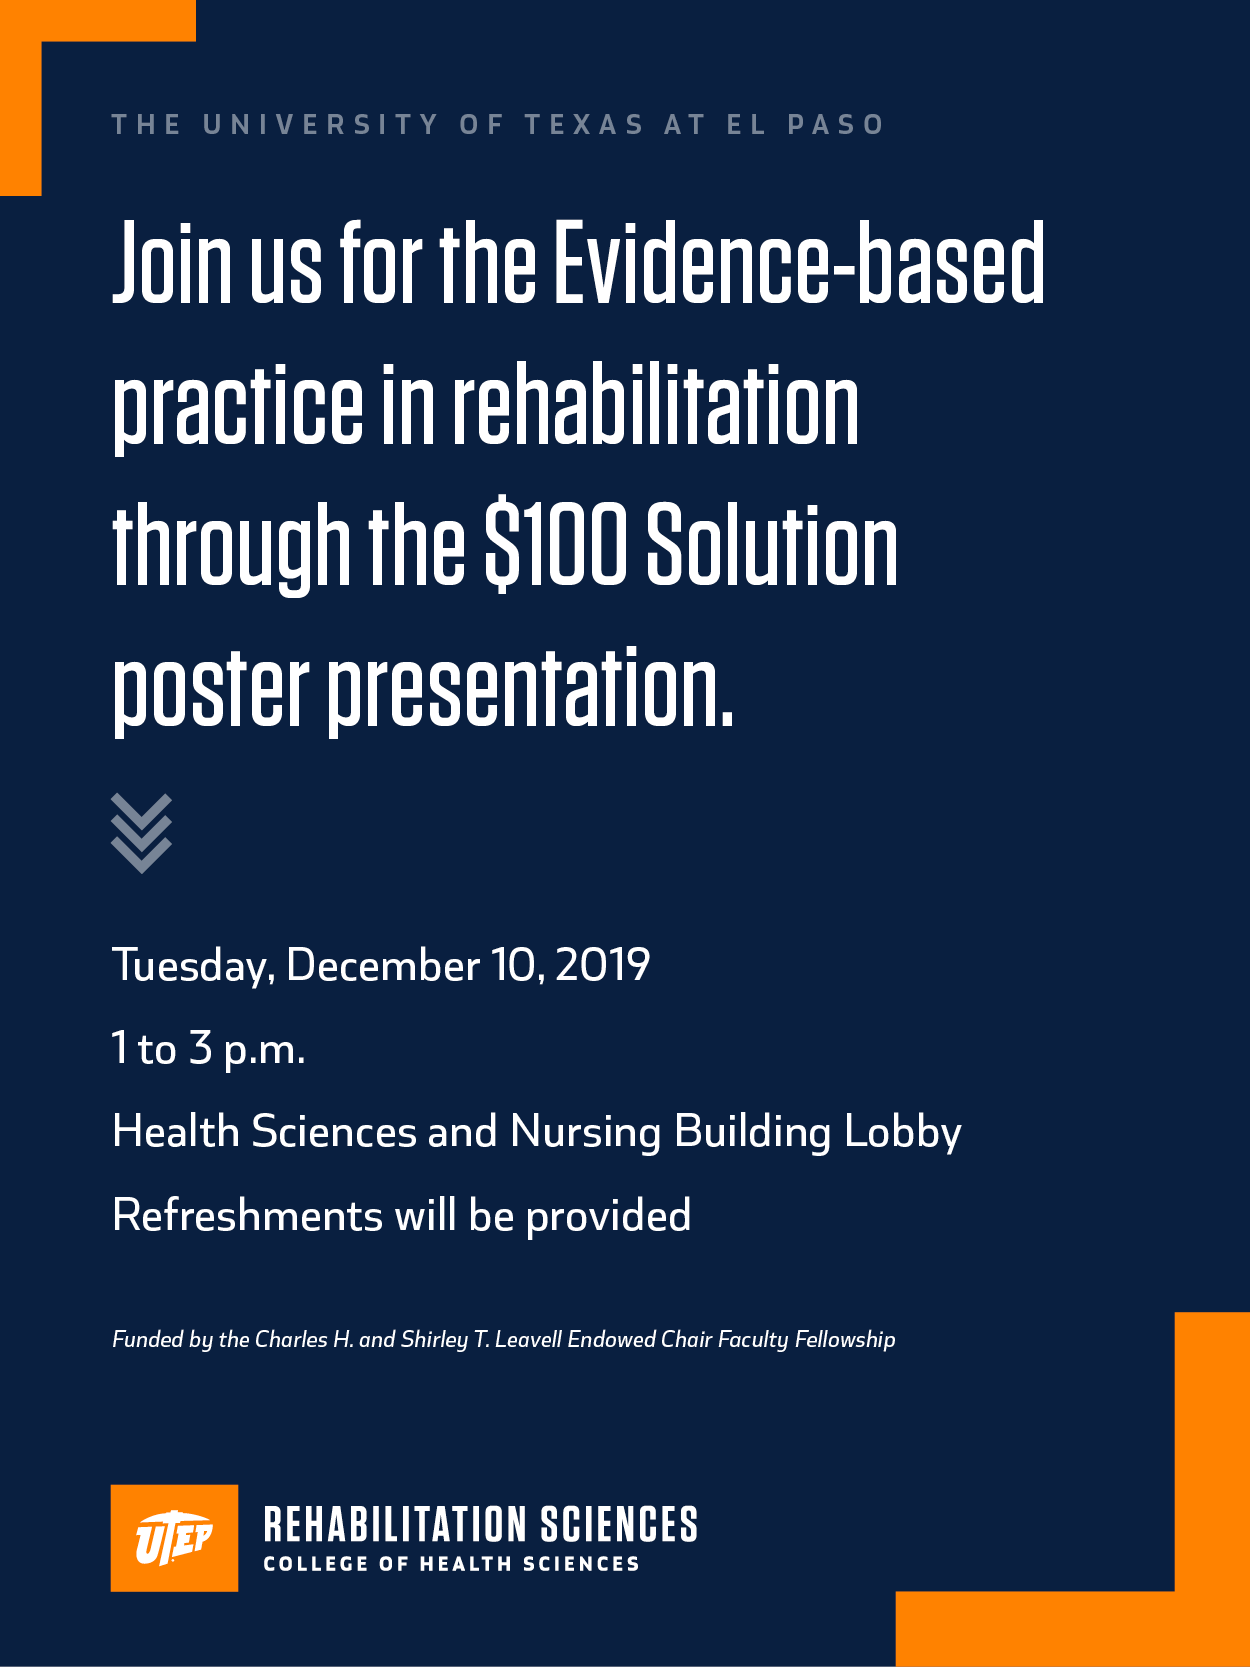 Students in The University of Texas at El Paso’s Bachelor of Science in Rehabilitation Sciences (BS-RHSC) and social work programs will present $100 Solutions they developed to address health-related quality of life issues in the community during a poster presentation from 1 to 3 p.m., Tuesday, Dec. 10, in the second-floor lobby of UTEP’s Health Sciences and Nursing Building.   